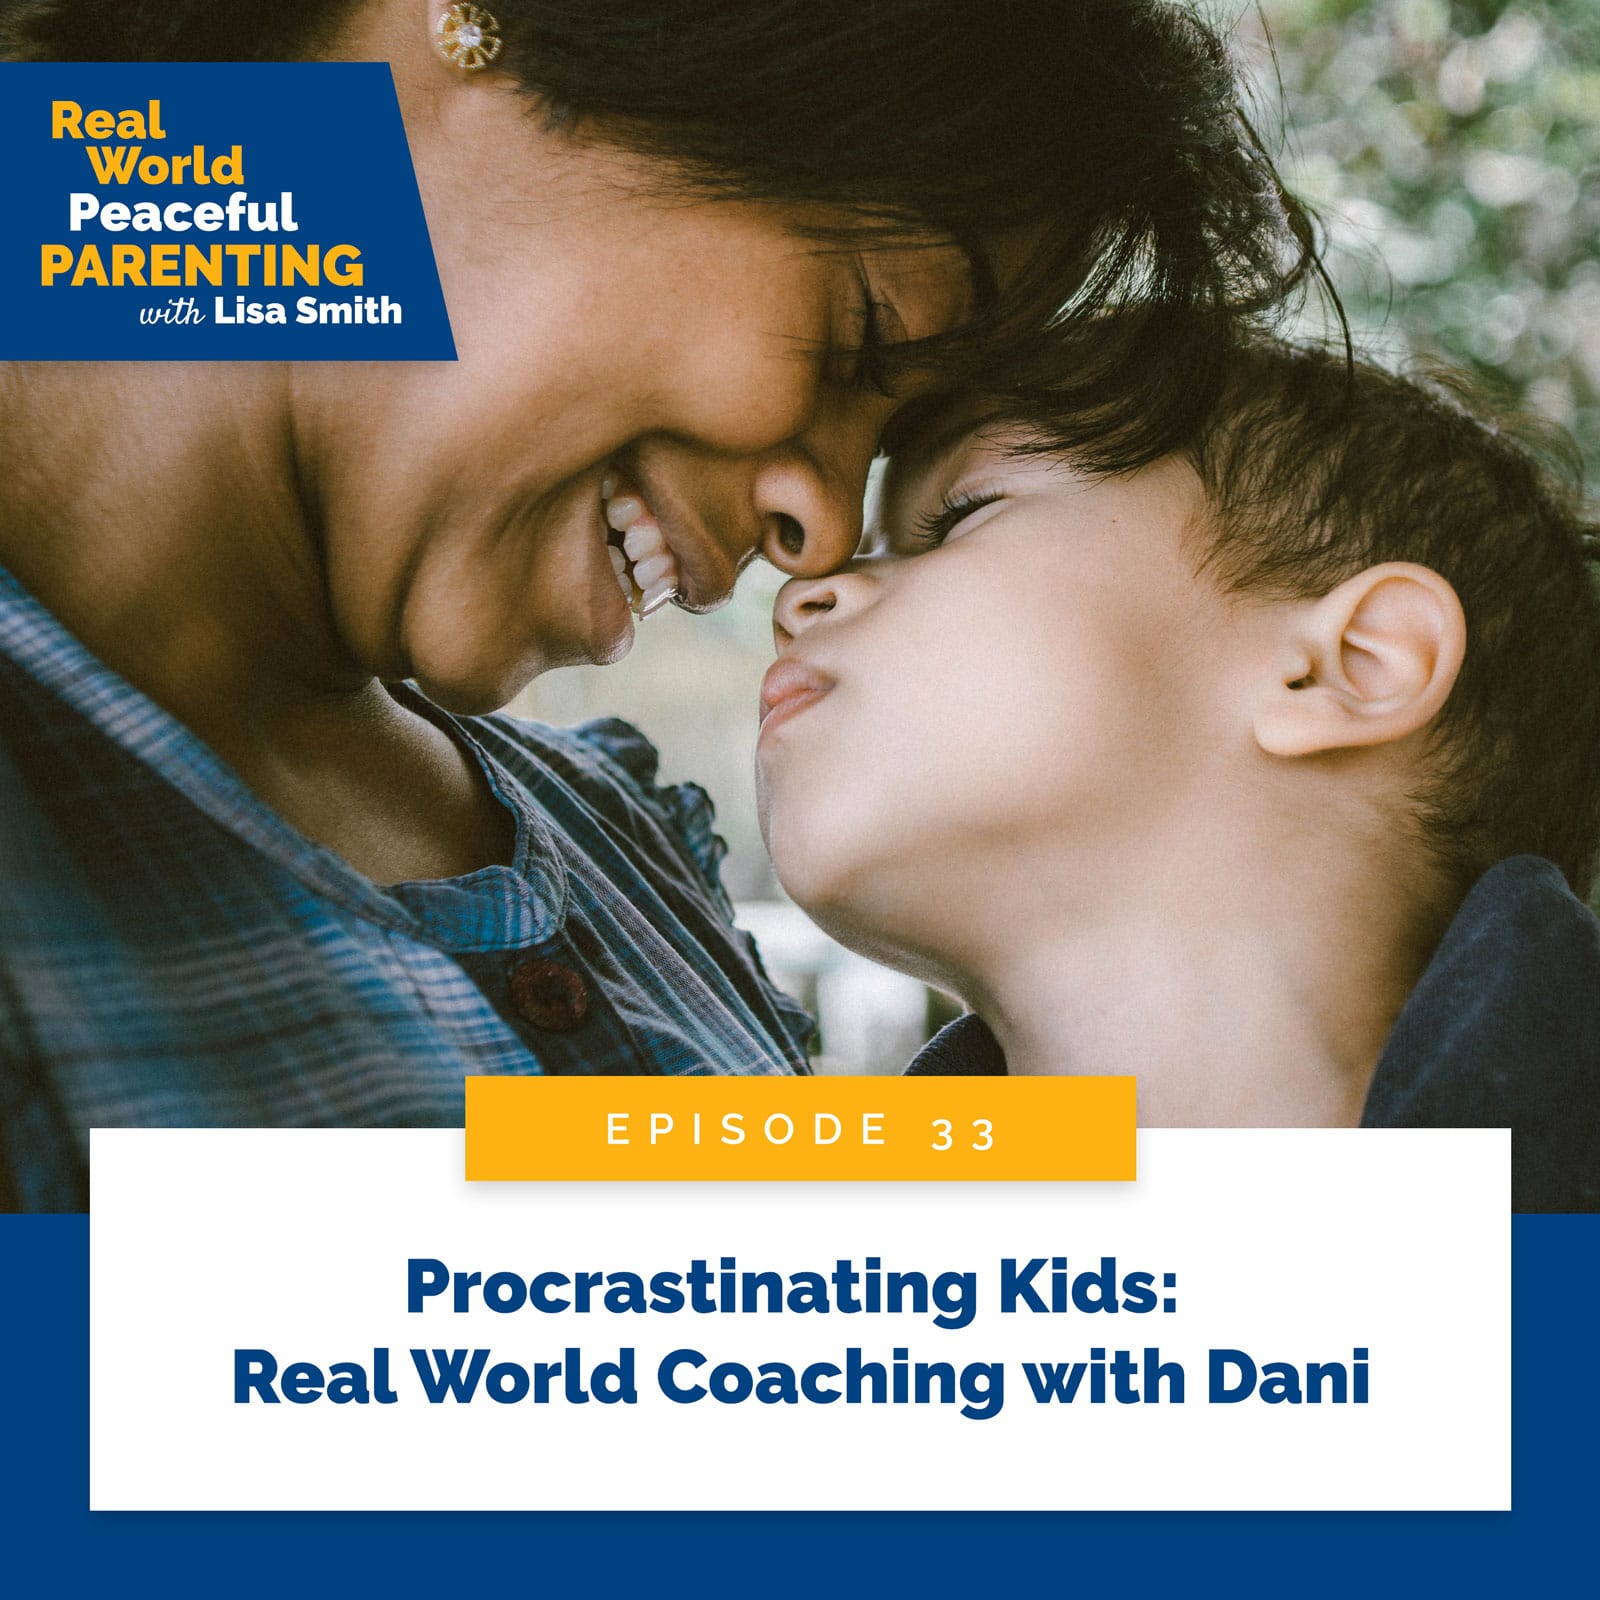 Real World Peaceful Parenting with Lisa Smith | Procrastinating Kids: Real World Coaching with Dani